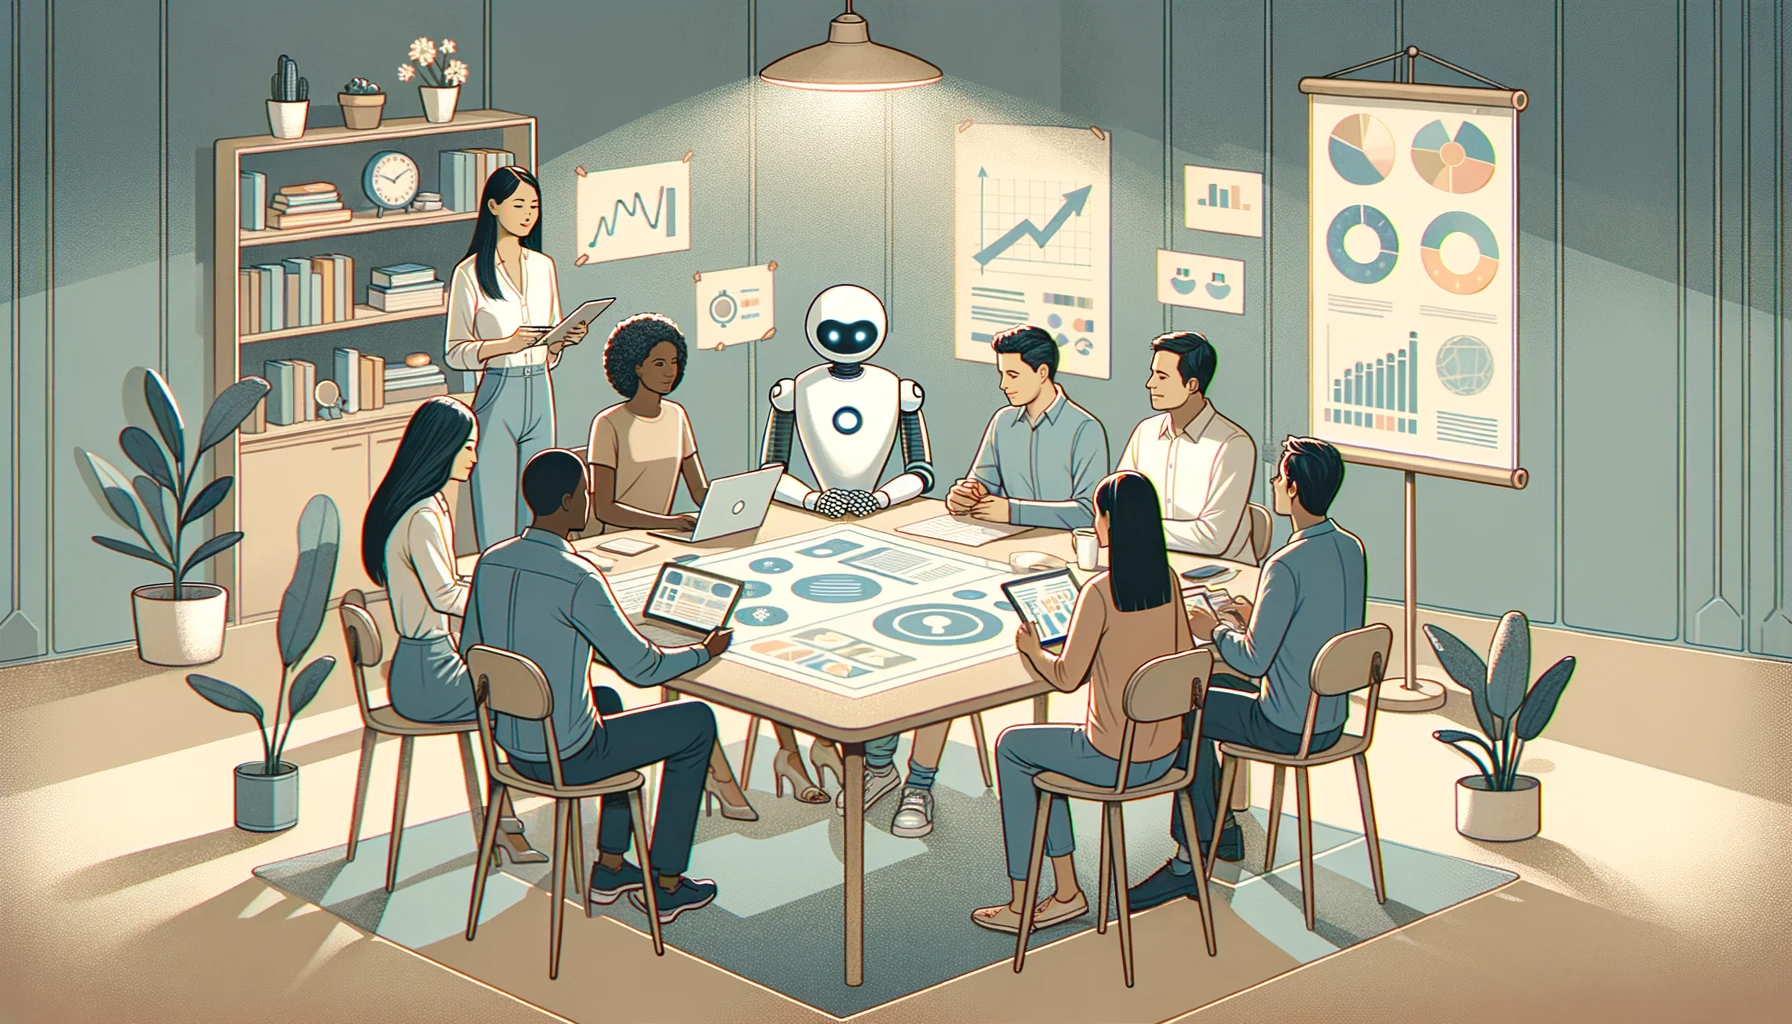 A group of people sitting around a table with a robot.